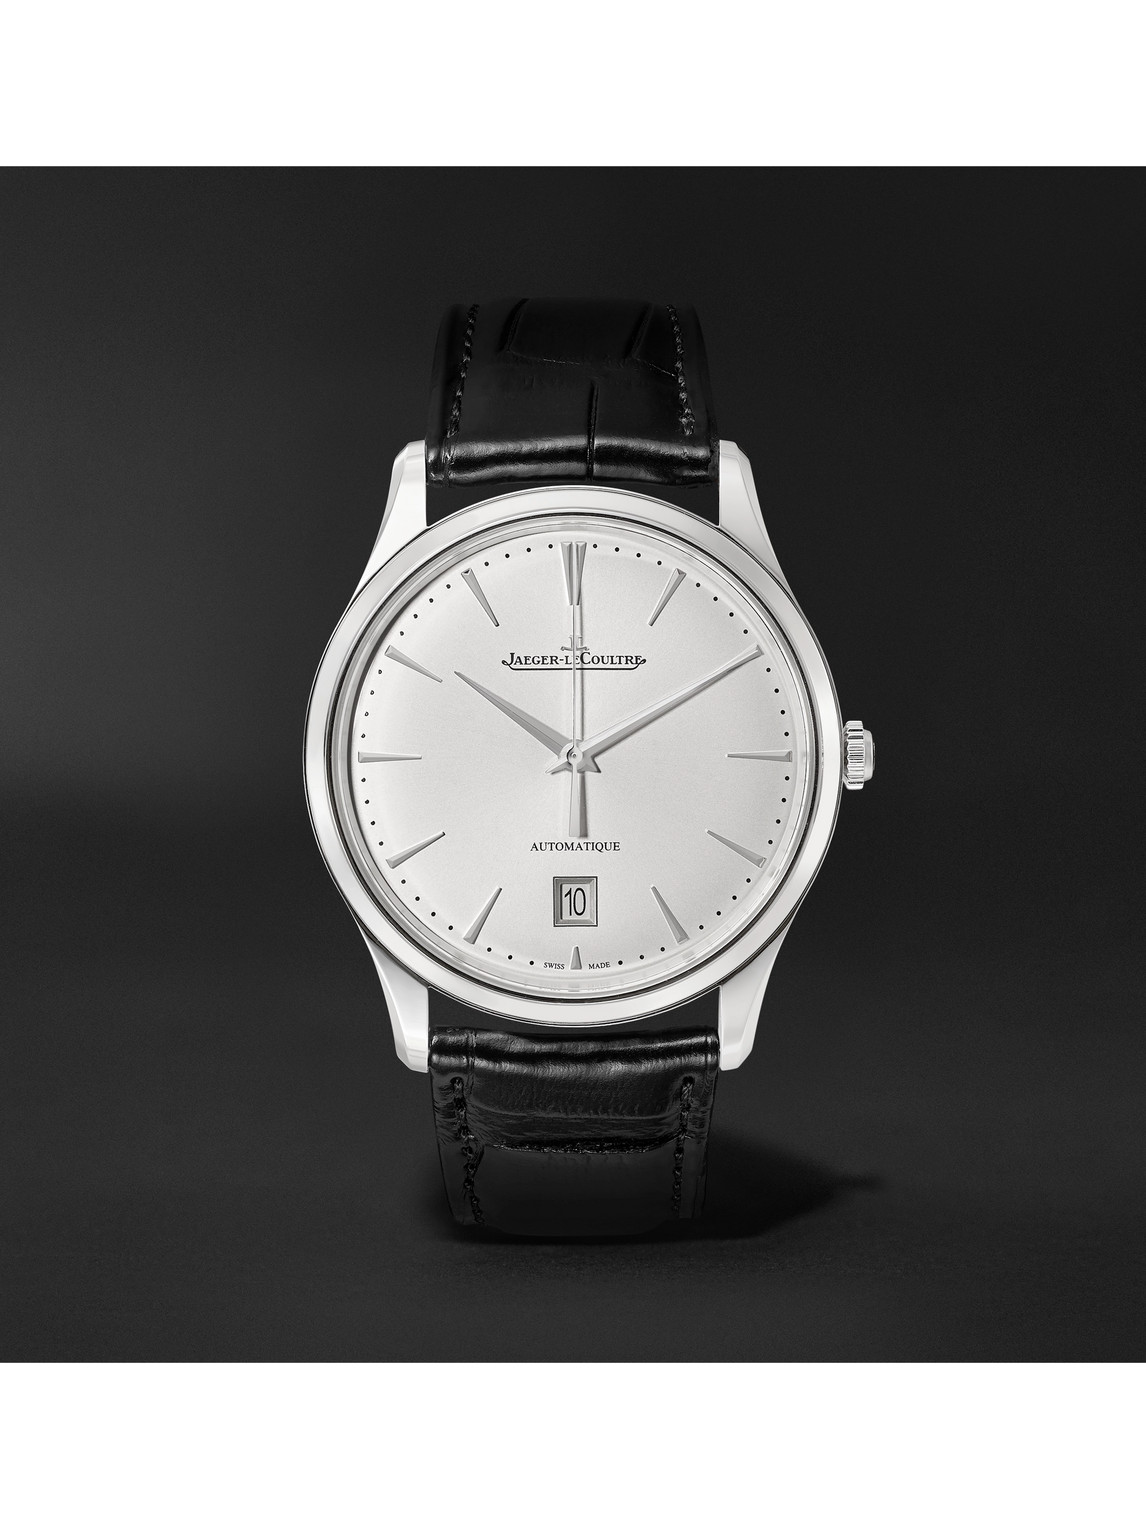 Jaeger-lecoultre Master Ultra Thin Date Automatic 39mm Stainless Steel And Alligator Watch, Ref. No. 1238420 In Silver